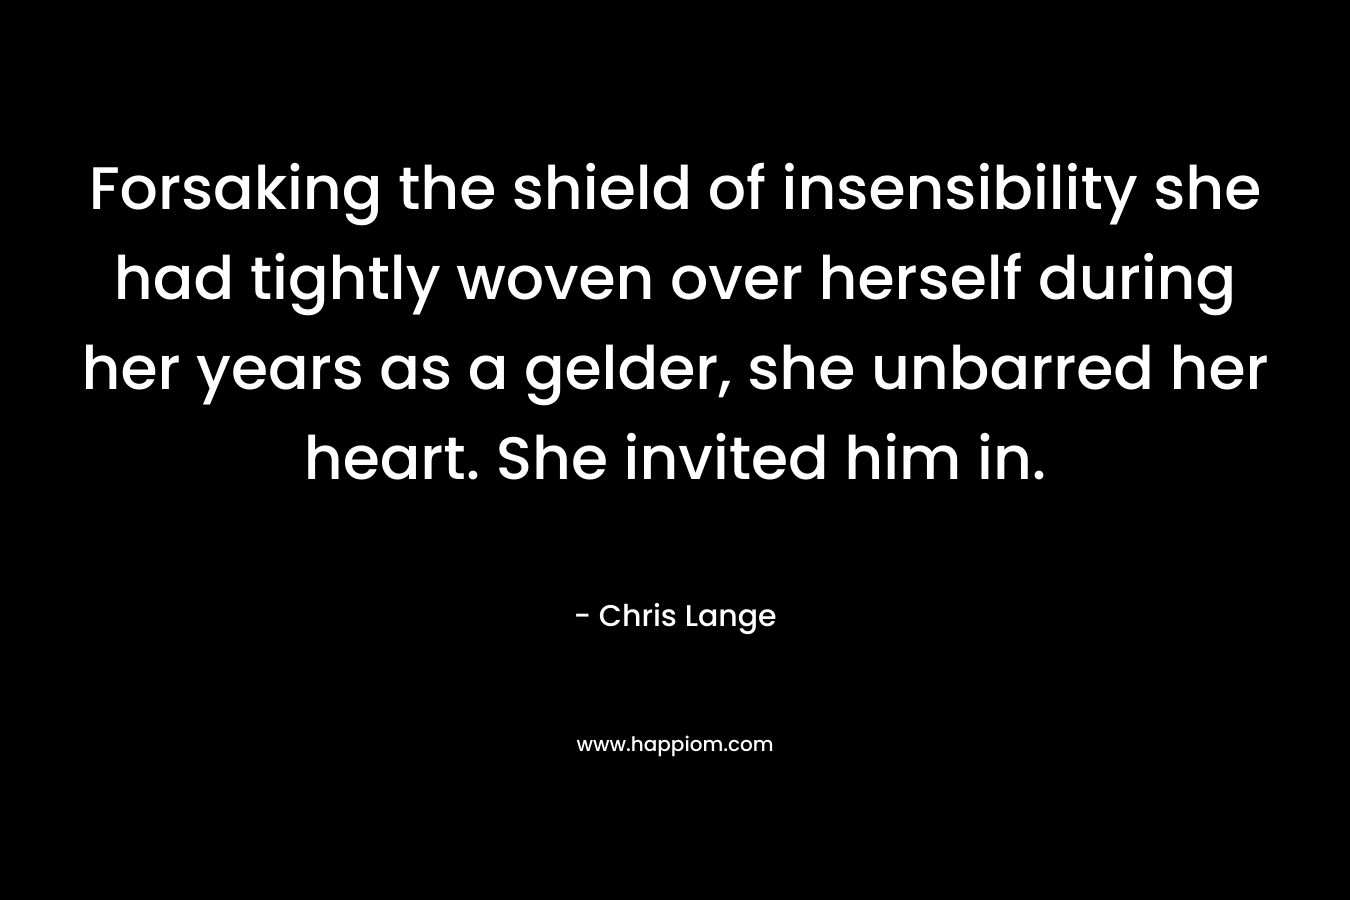 Forsaking the shield of insensibility she had tightly woven over herself during her years as a gelder, she unbarred her heart. She invited him in. – Chris Lange